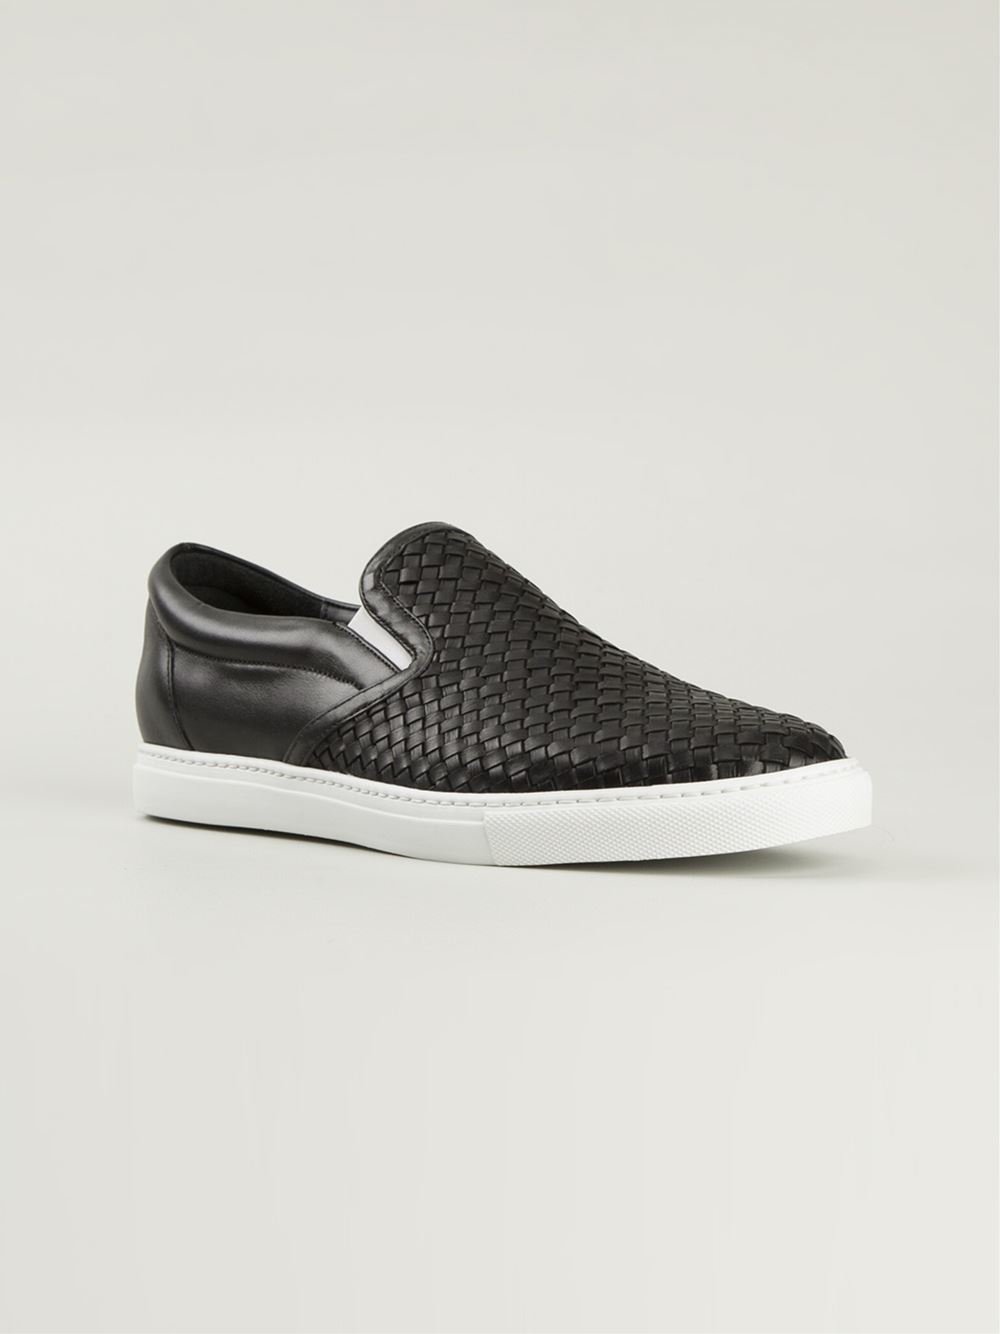 dsquared2 slip-on sneakers